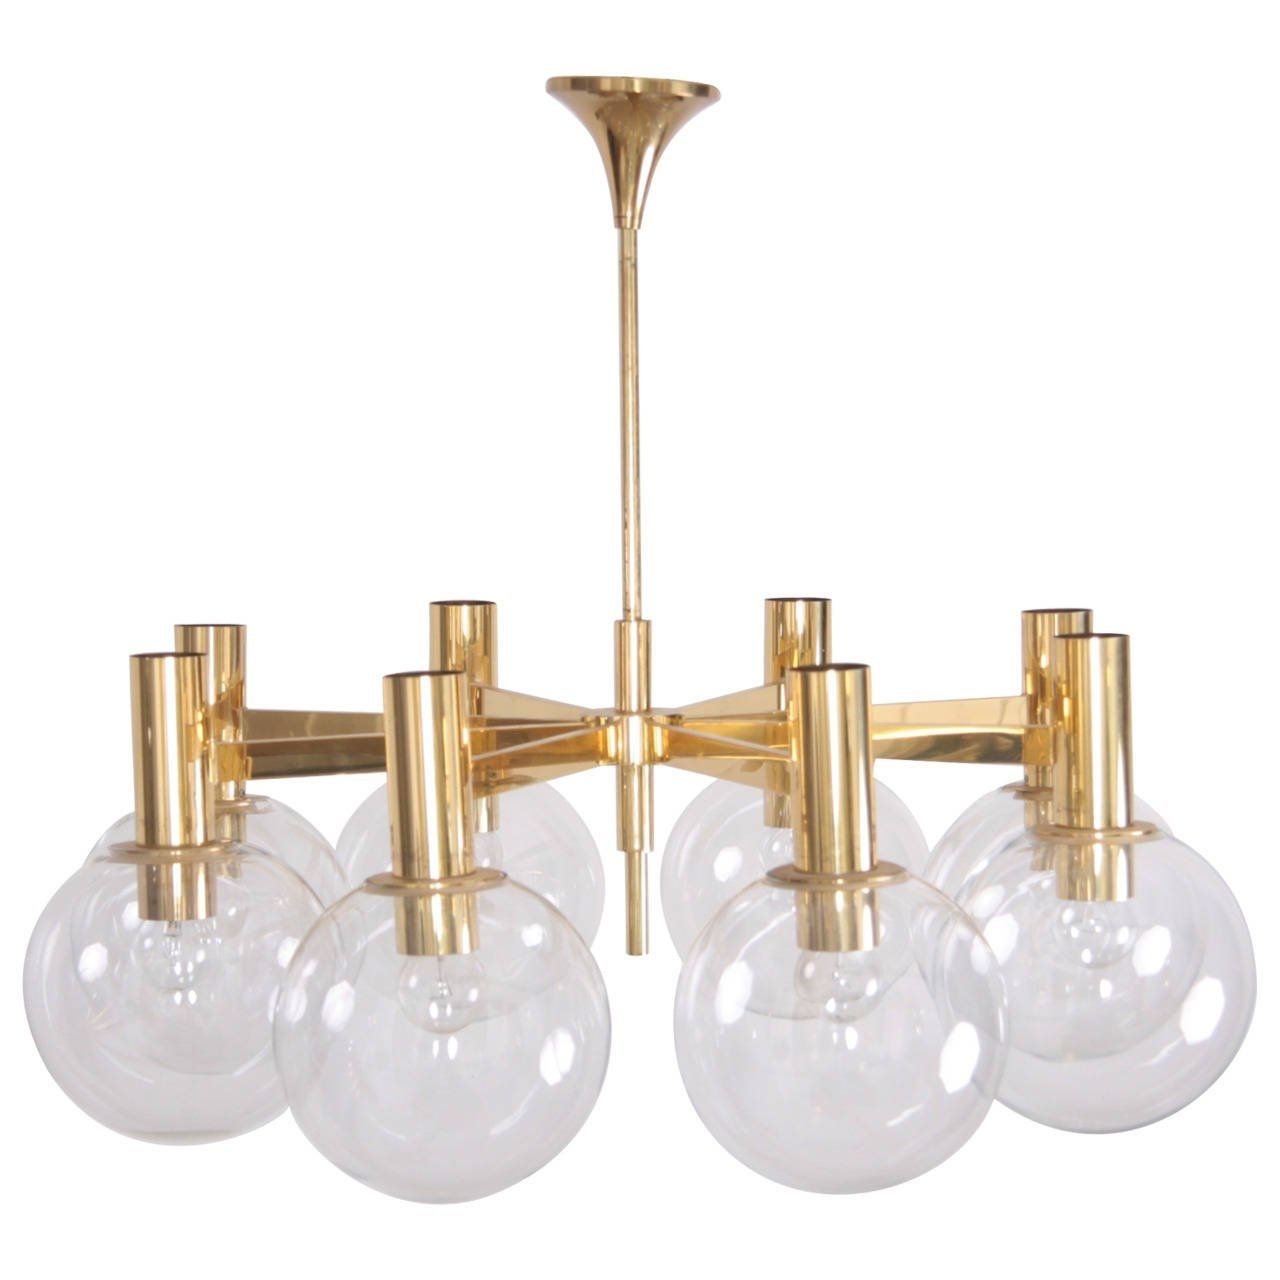 Extra Large Brass Chandelier With Eight Arms Ott International Pertaining To Large Brass Chandelier (View 5 of 12)